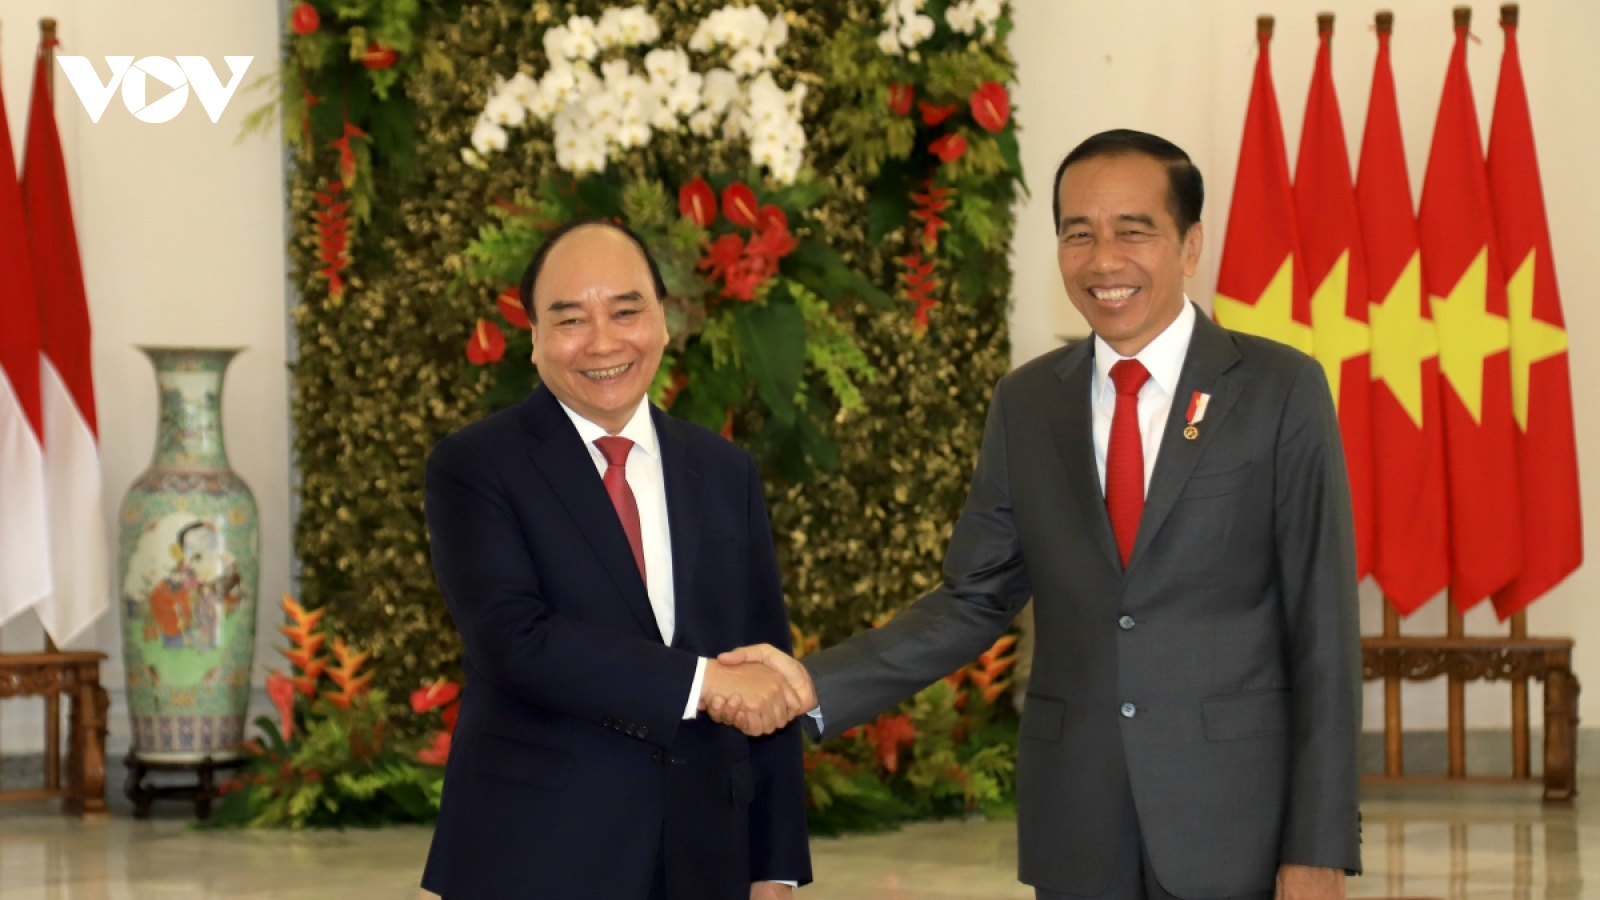 Indonesian President hosts welcome ceremony for Vietnamese State leader